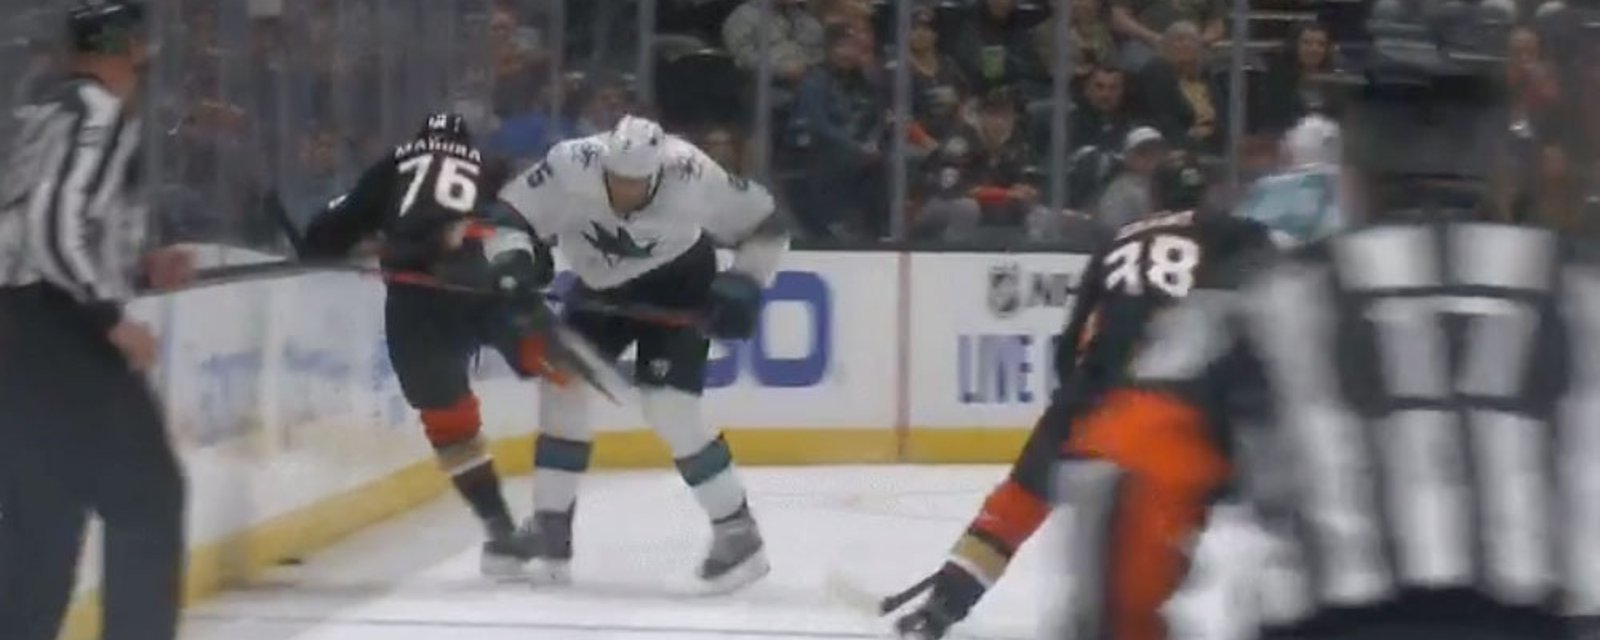 Sharks’ Prout gets tossed from the game on dirty play! 